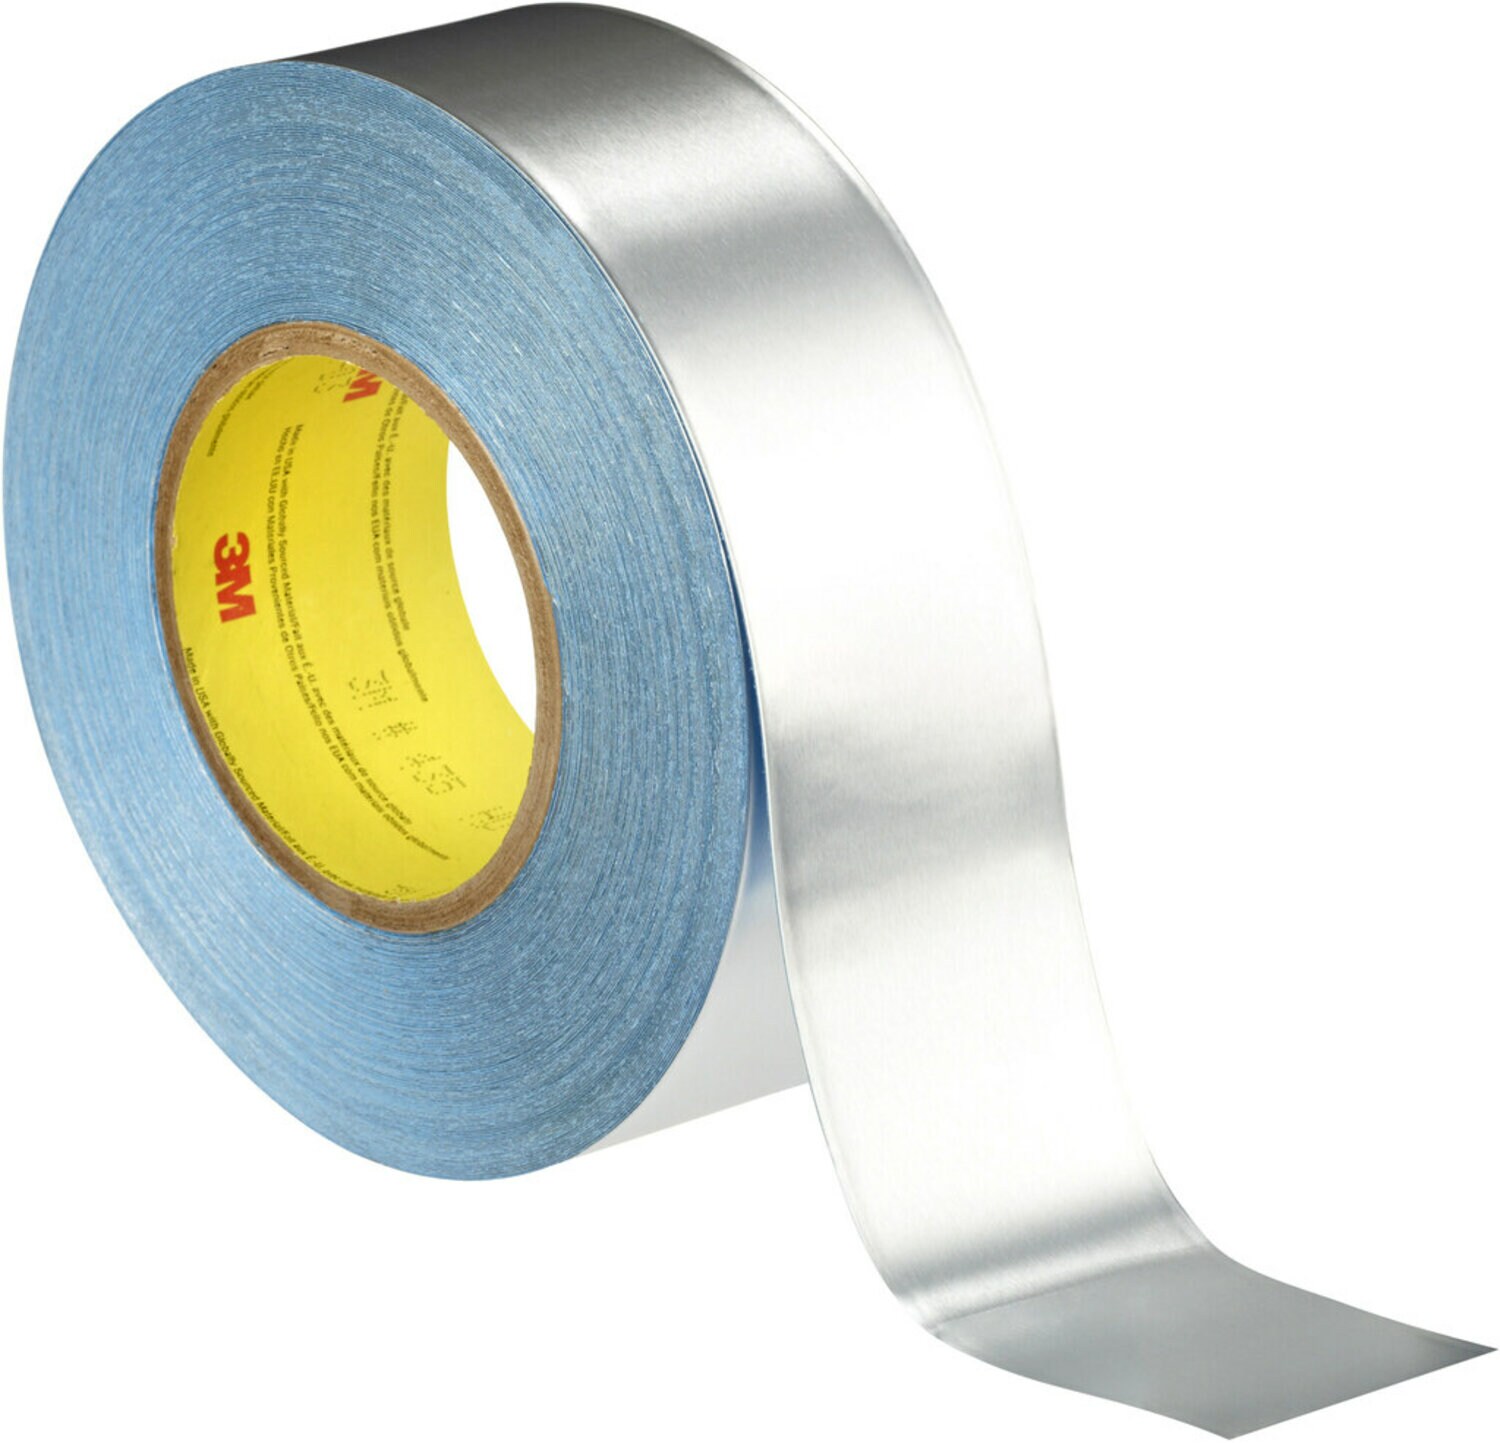 7000049121 - 3M Vibration Damping Tape 436, Silver, 2 in x 36 yd, 17.5 mil, 6 rolls
per case